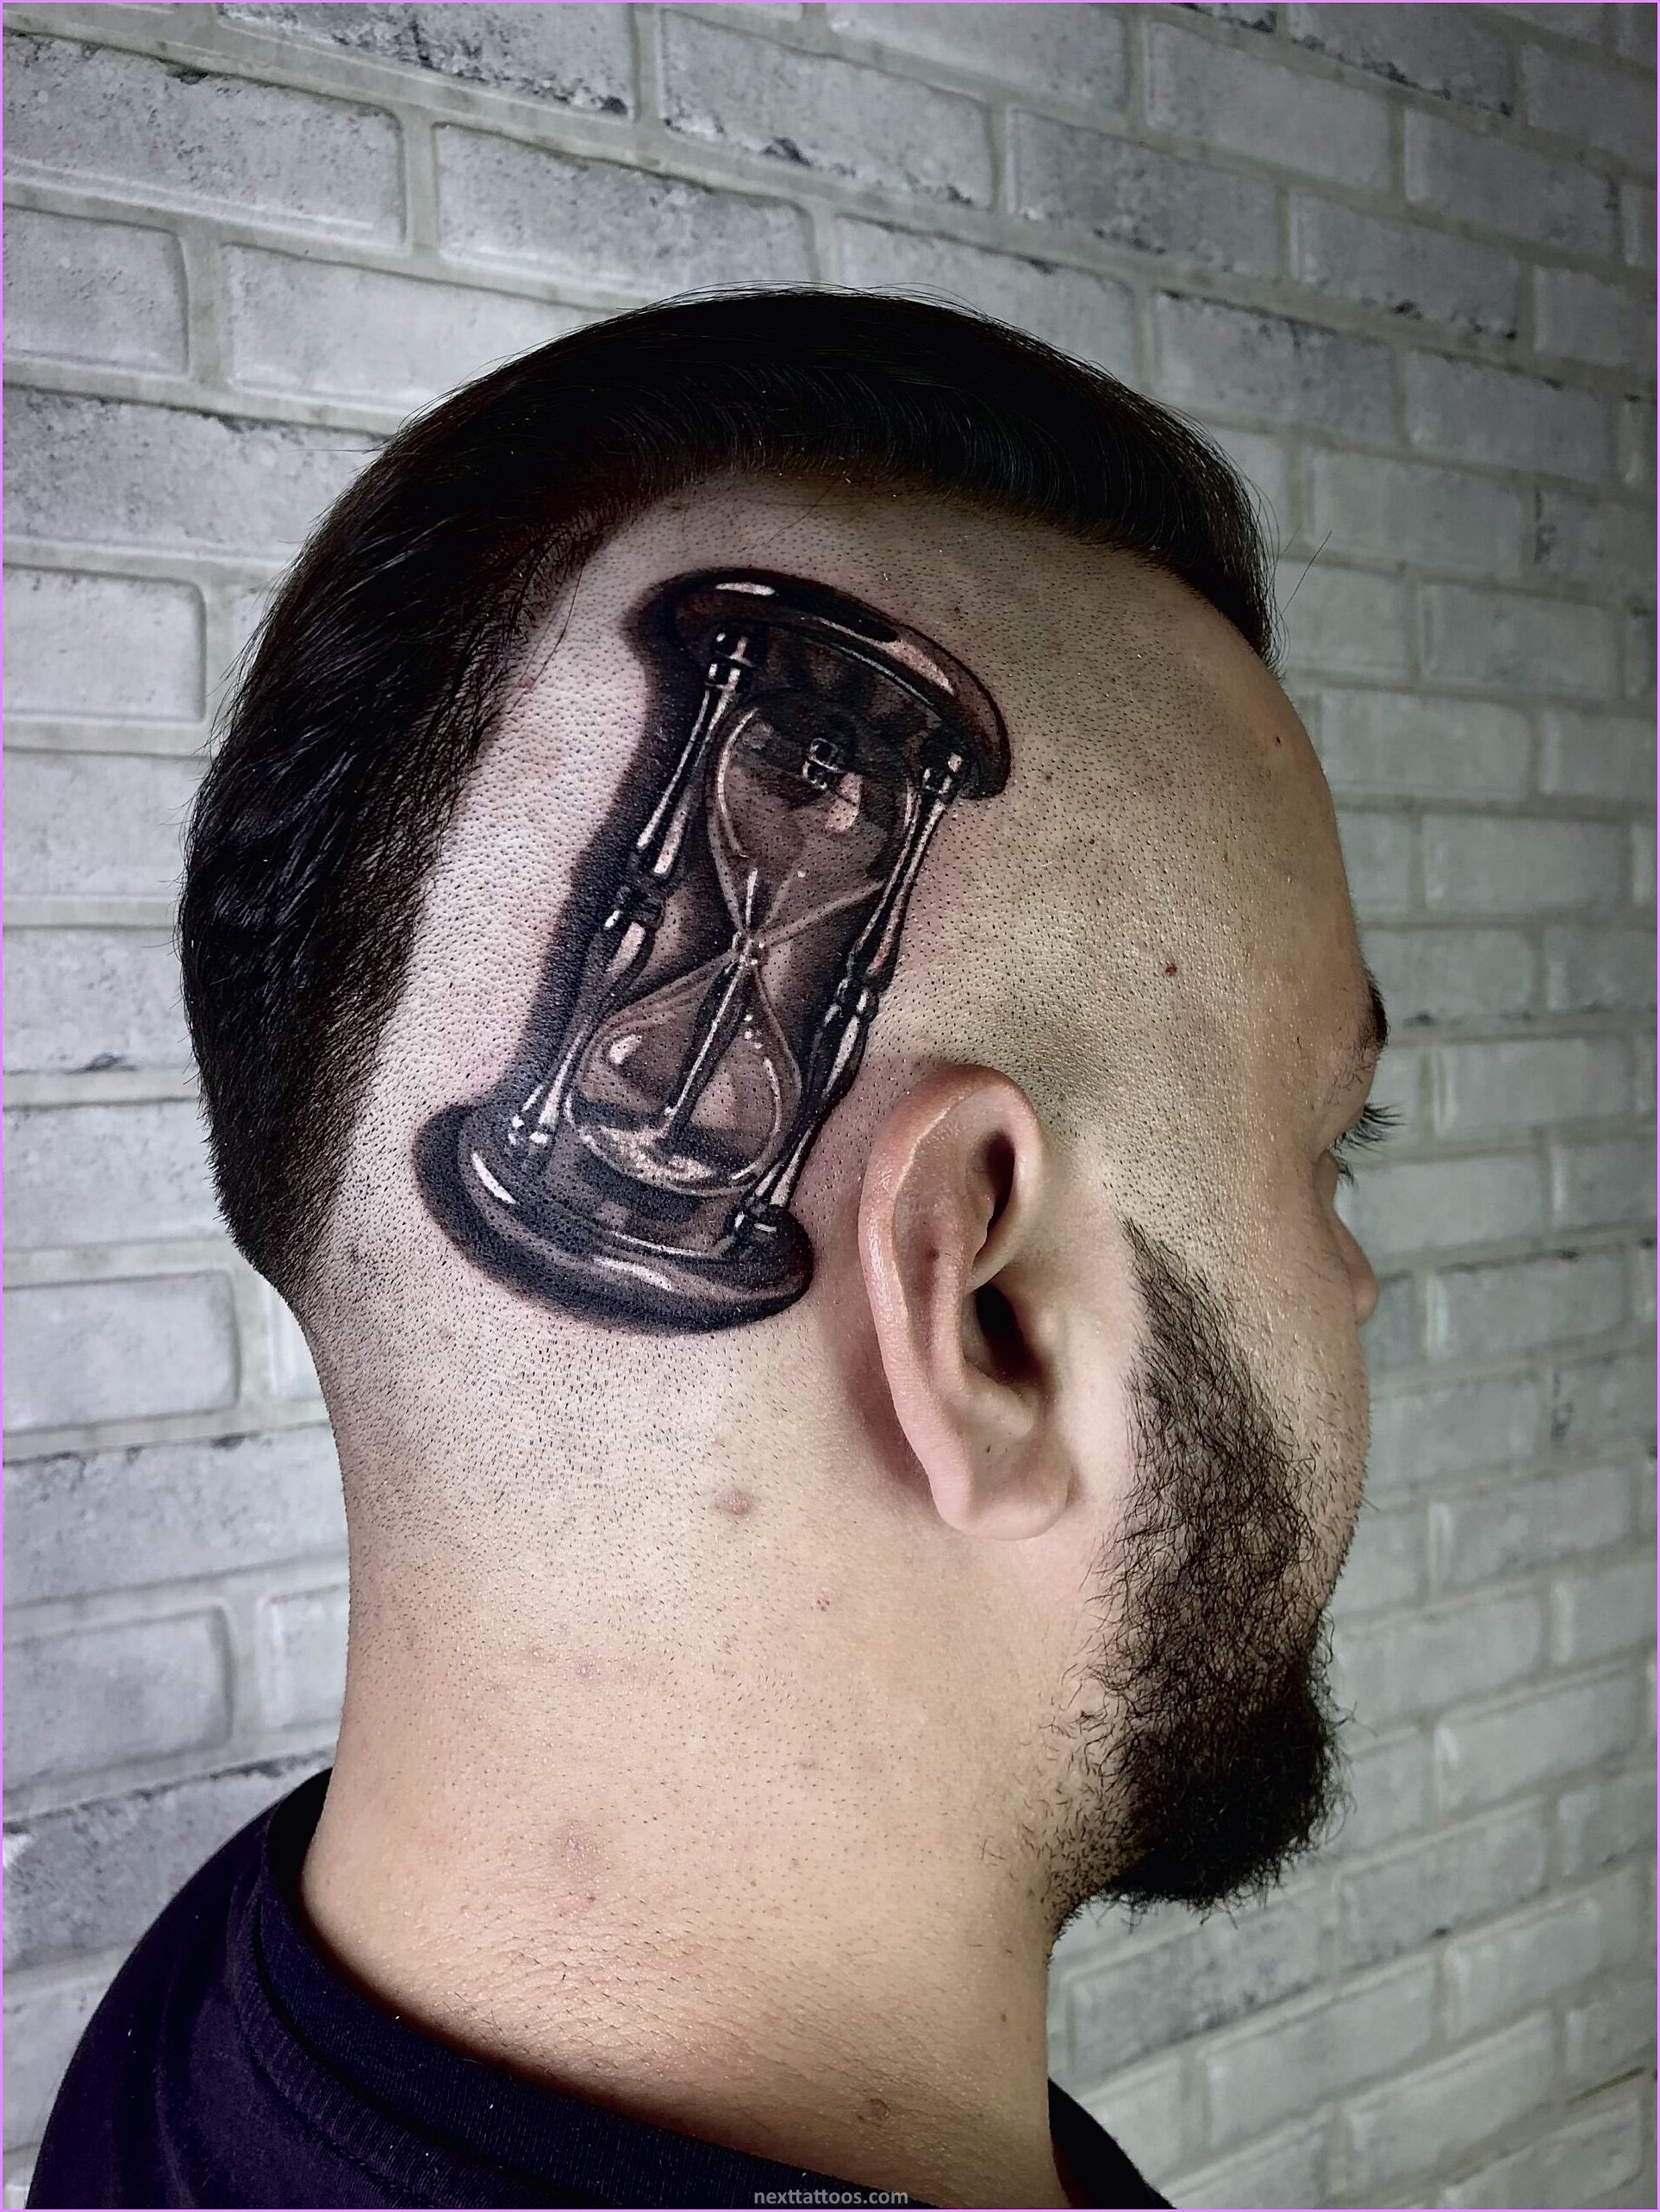 Next Level Custom Tattoo - The Easy Way to Get Your Tattoo